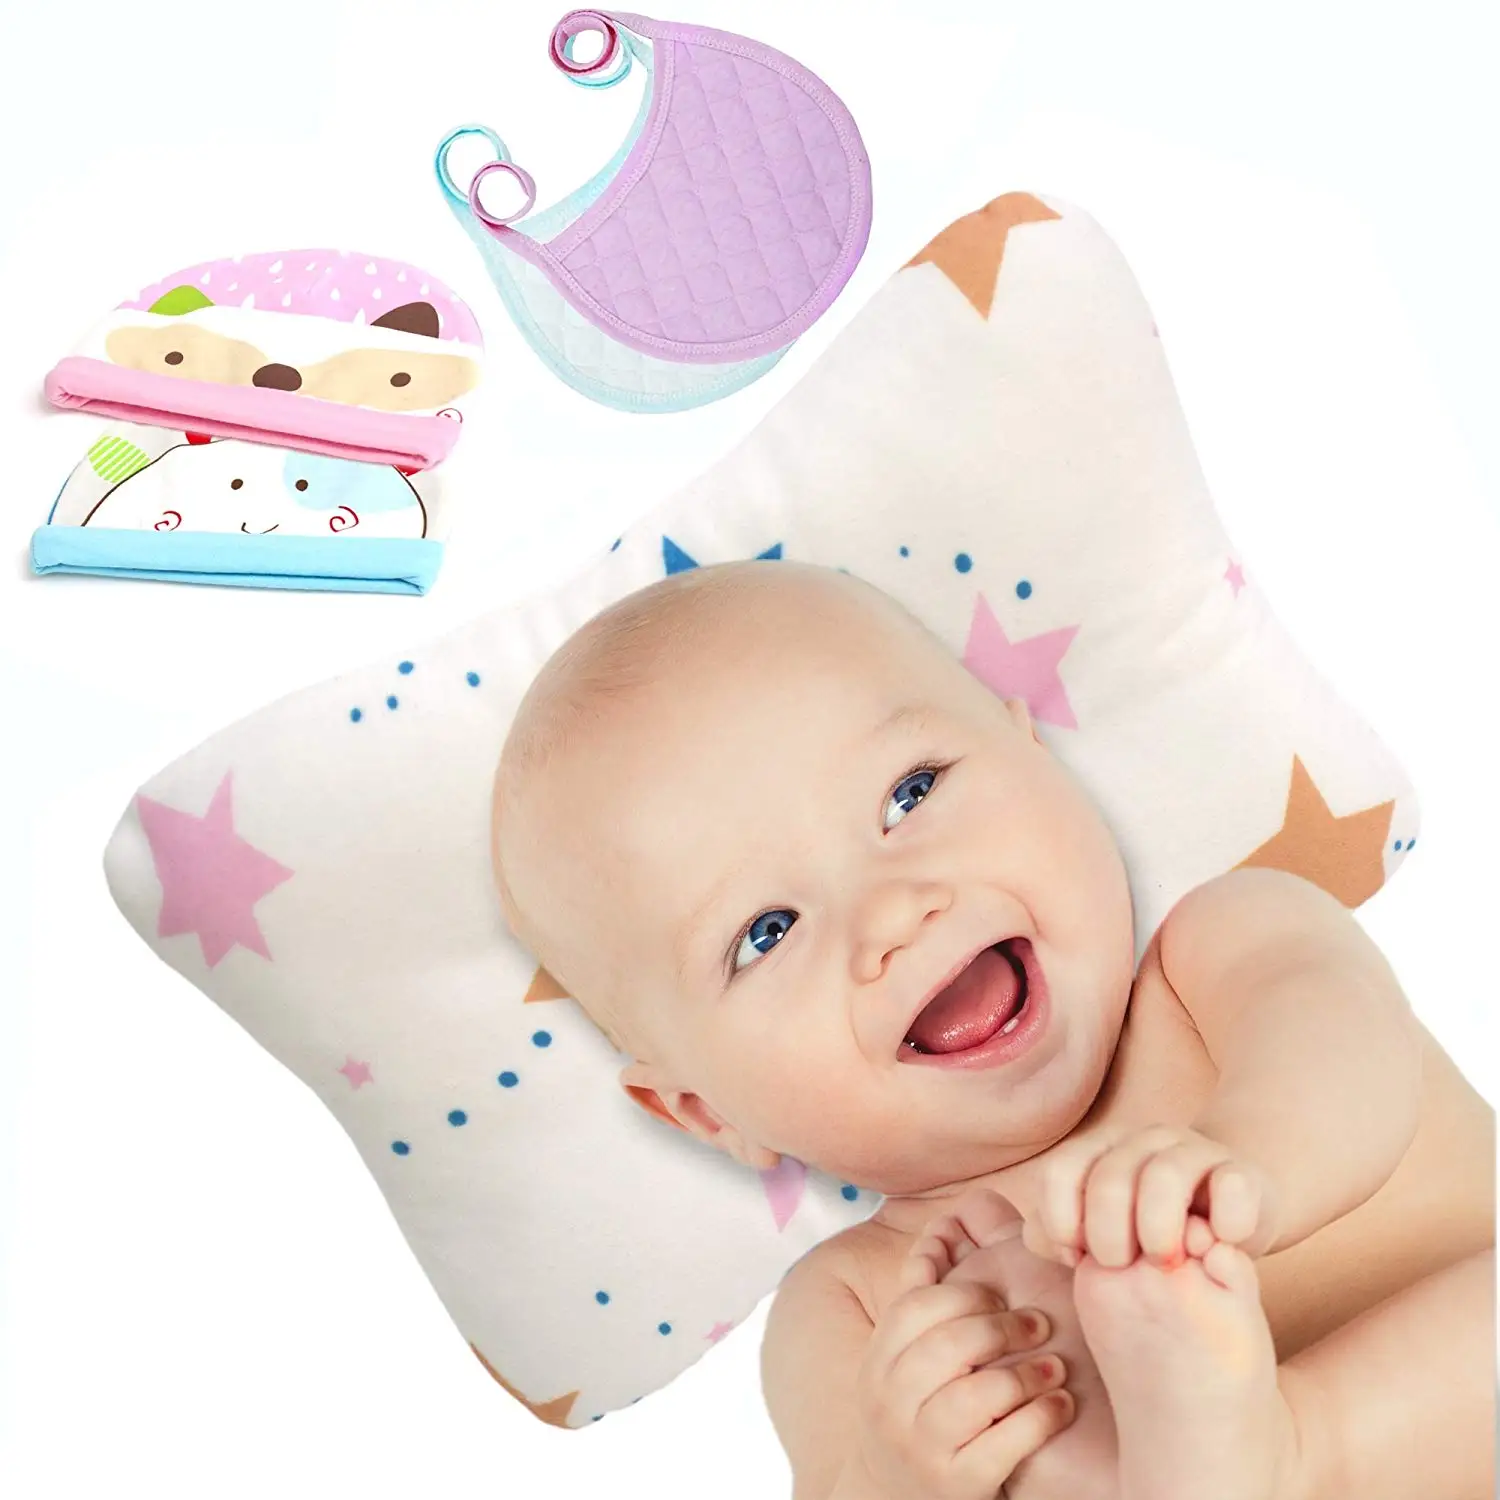 Cheap Wedge Pillow For Baby Flat Head 